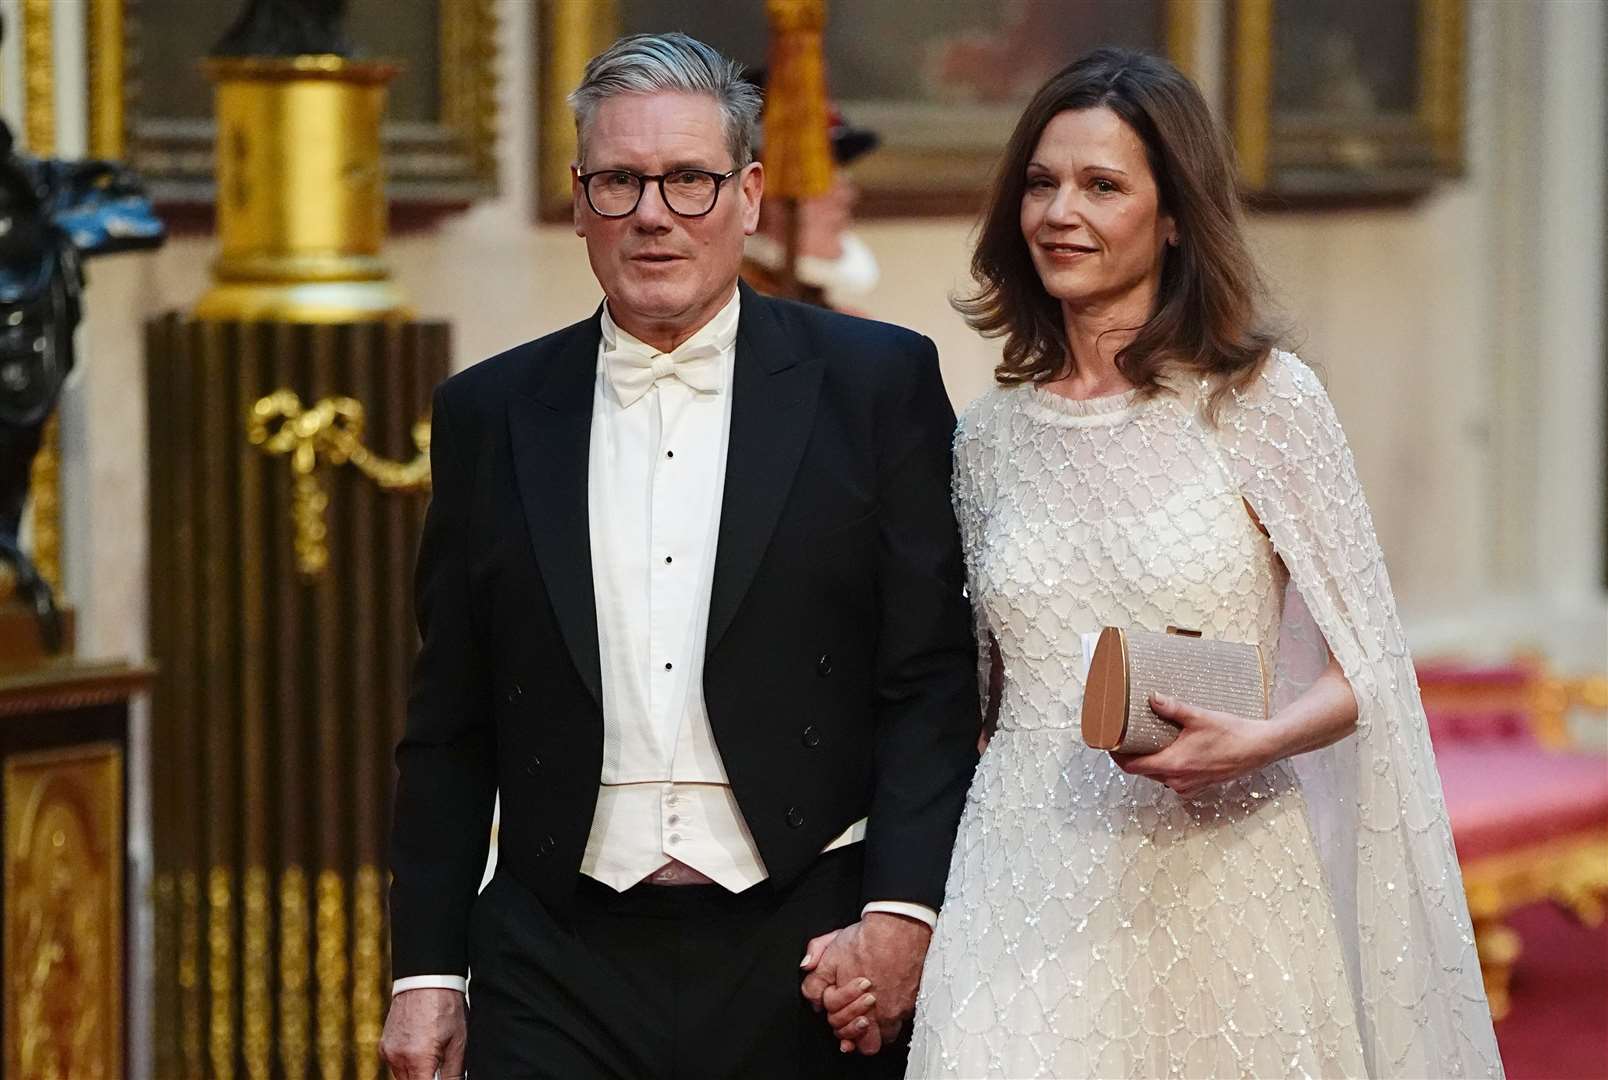 Labour leader Sir Keir Starmer with his wife Victoria at the state banquet for the Japanese emperor (Aaron Chown/PA)